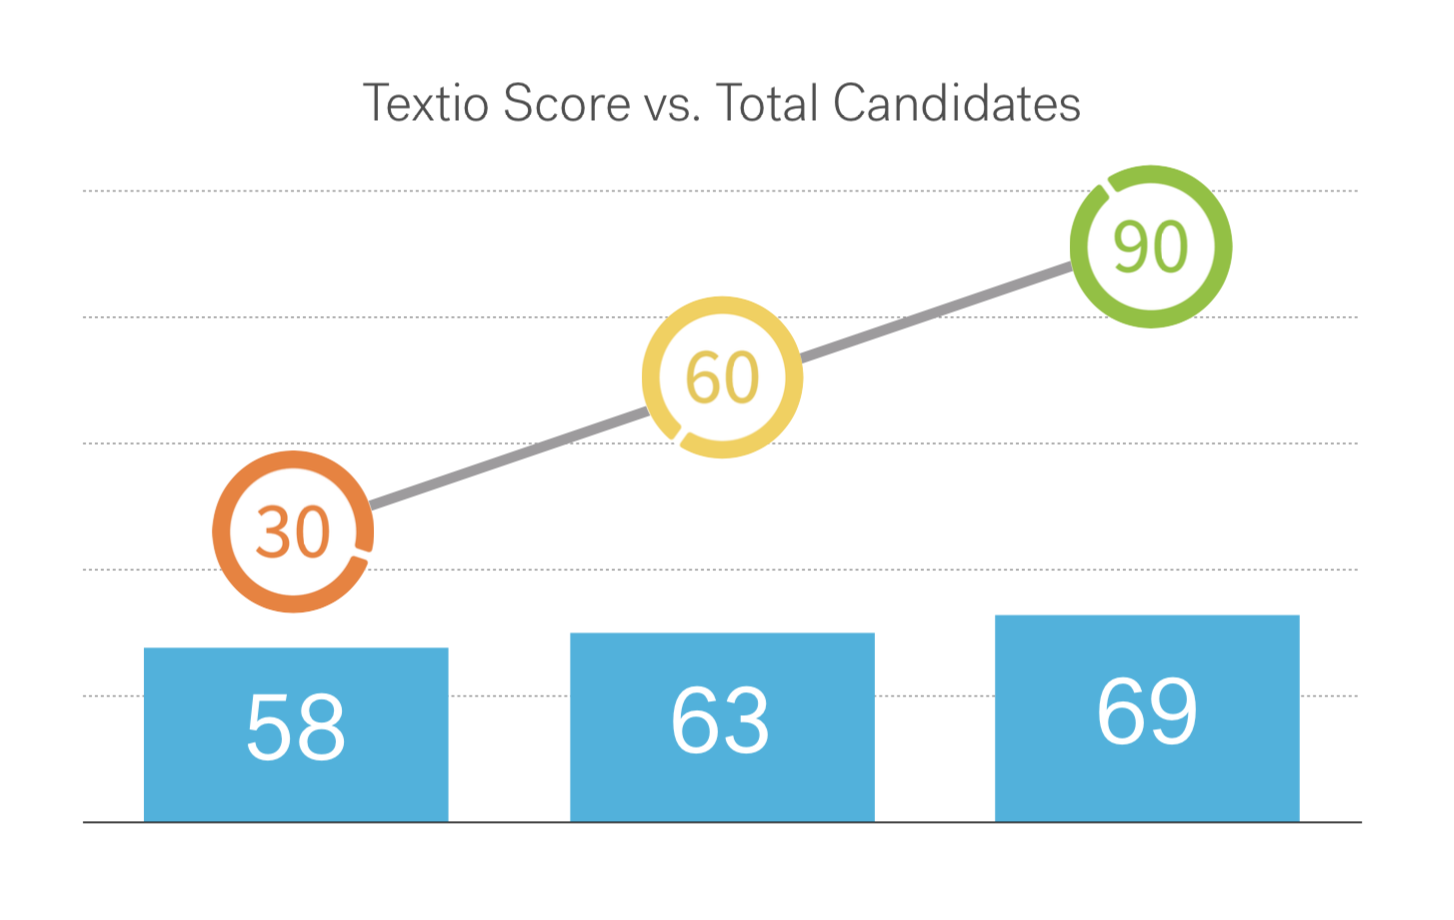 Graph showing that as Textio Score increases, the number of candidates increases